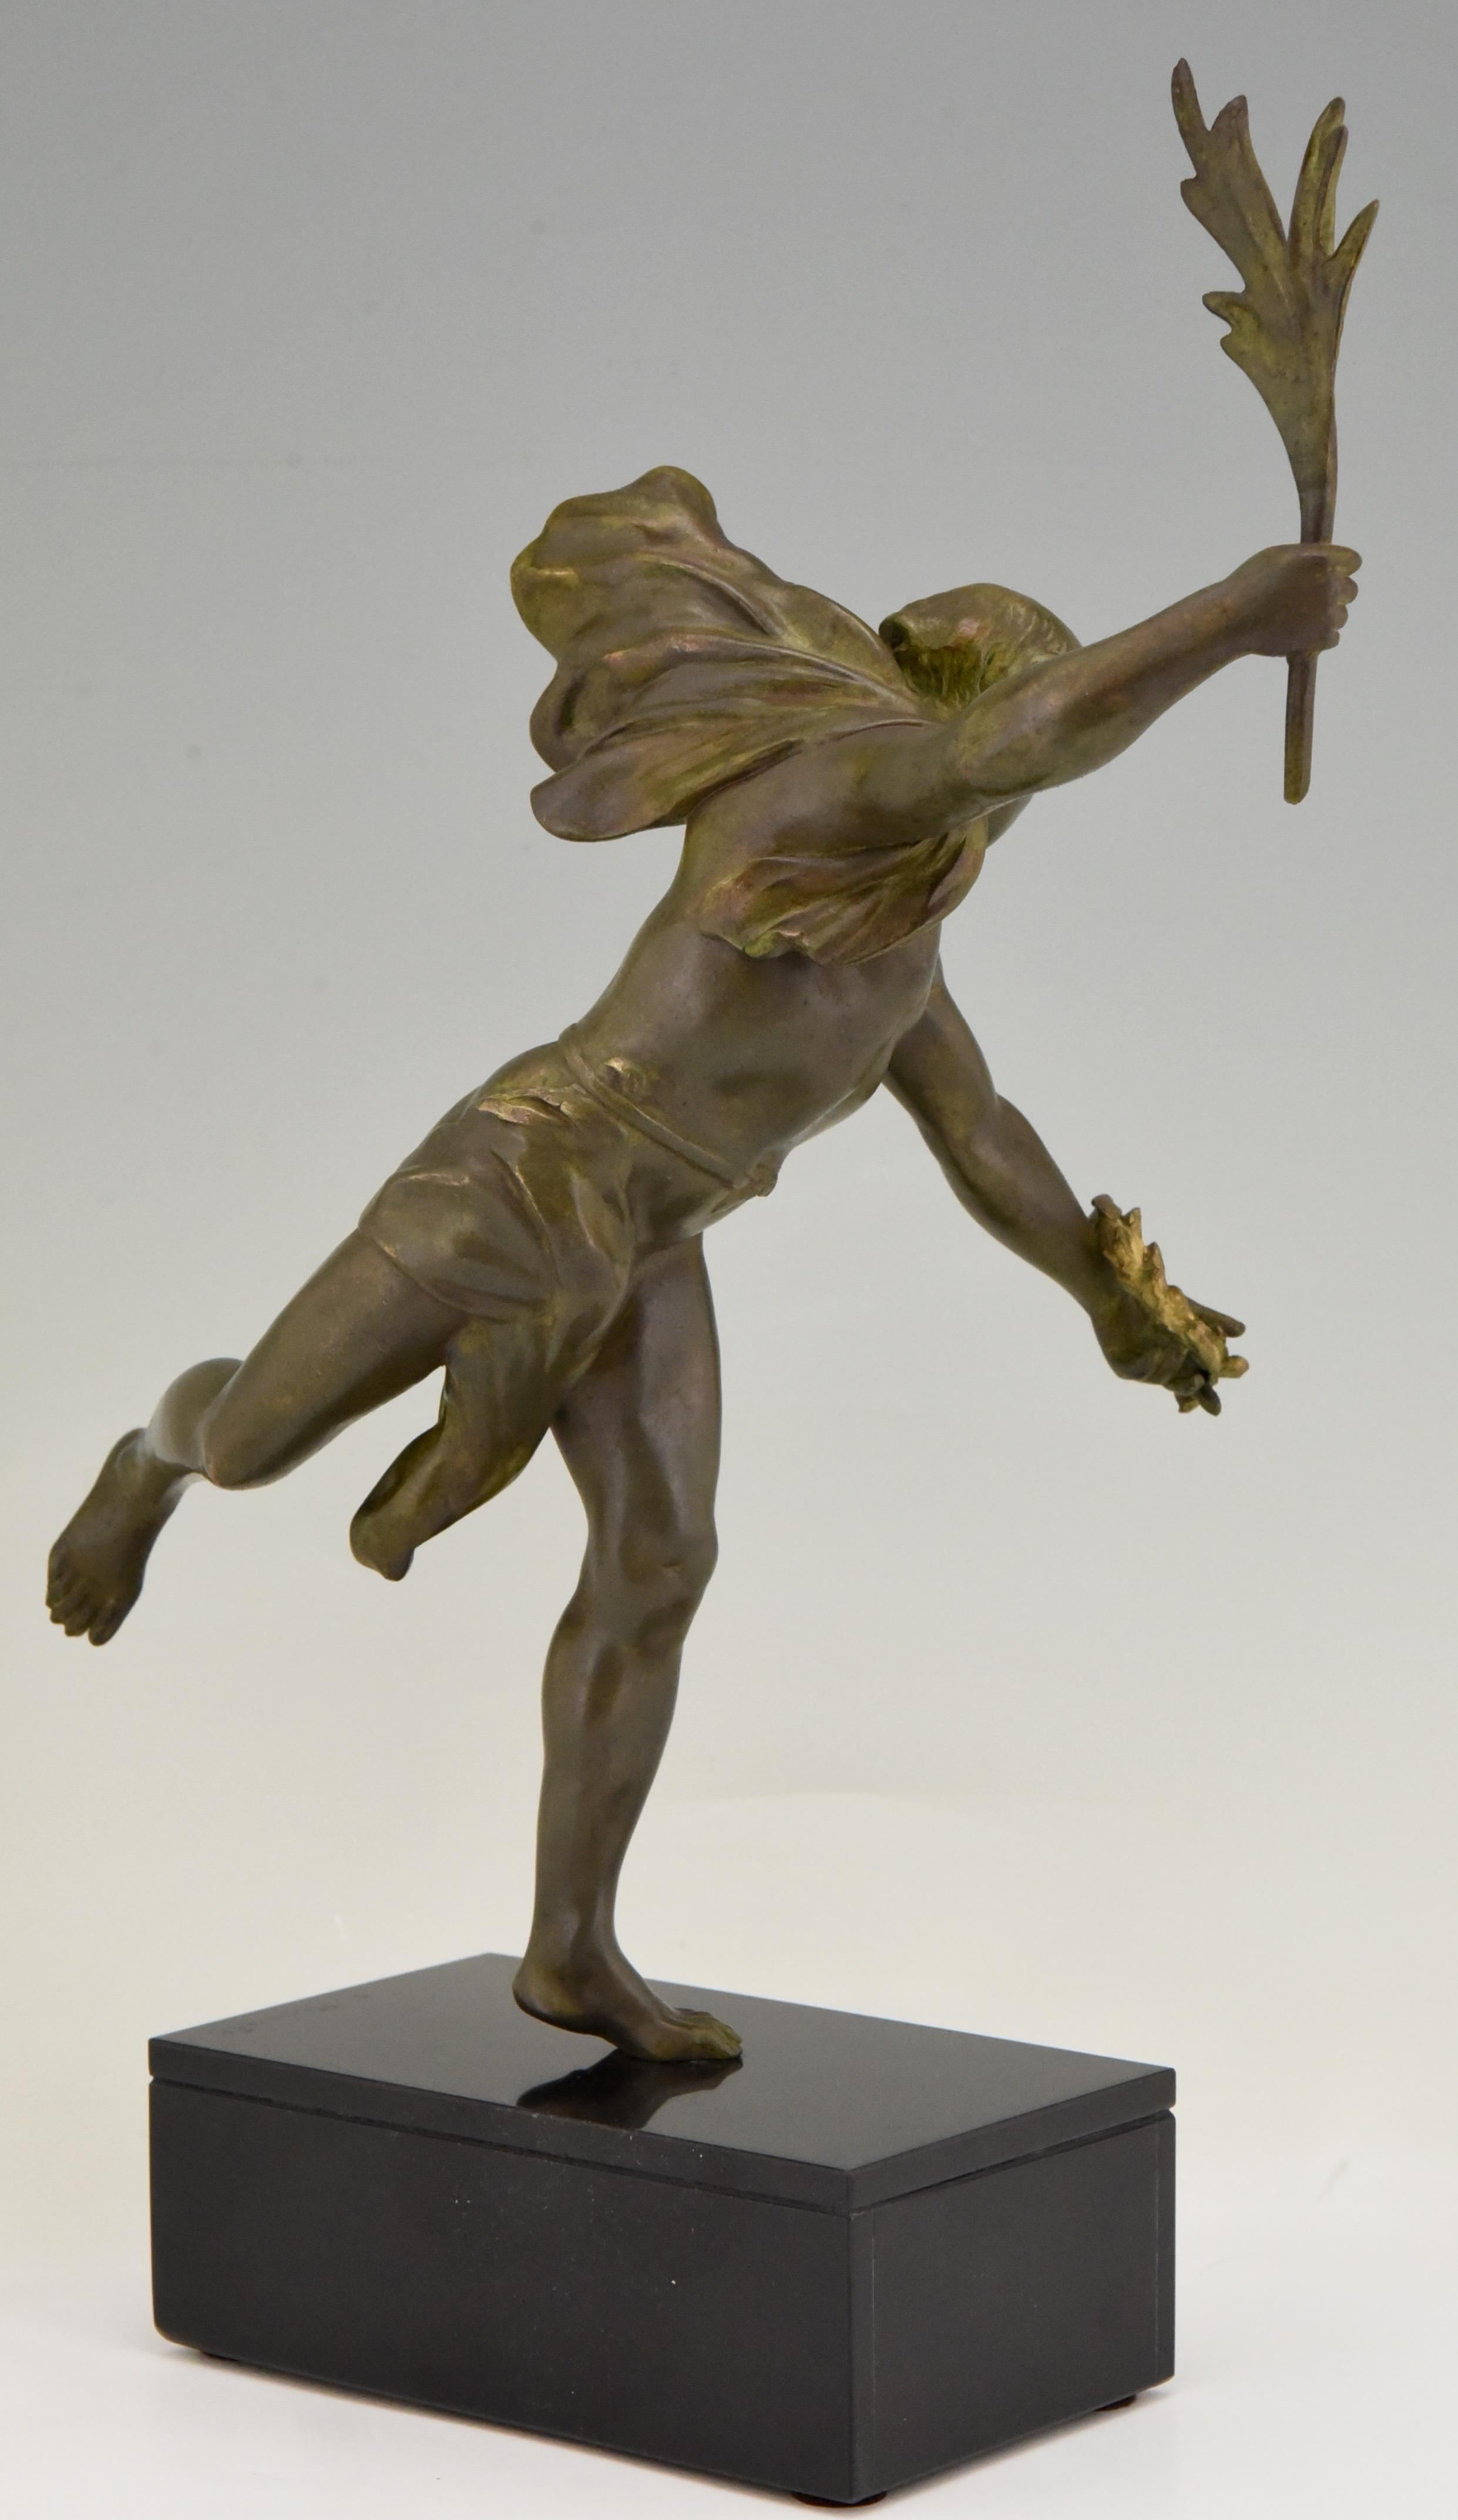 Patinated Antique Sculpture of a Man with Laurel Branch by E. Picault ca. 1900